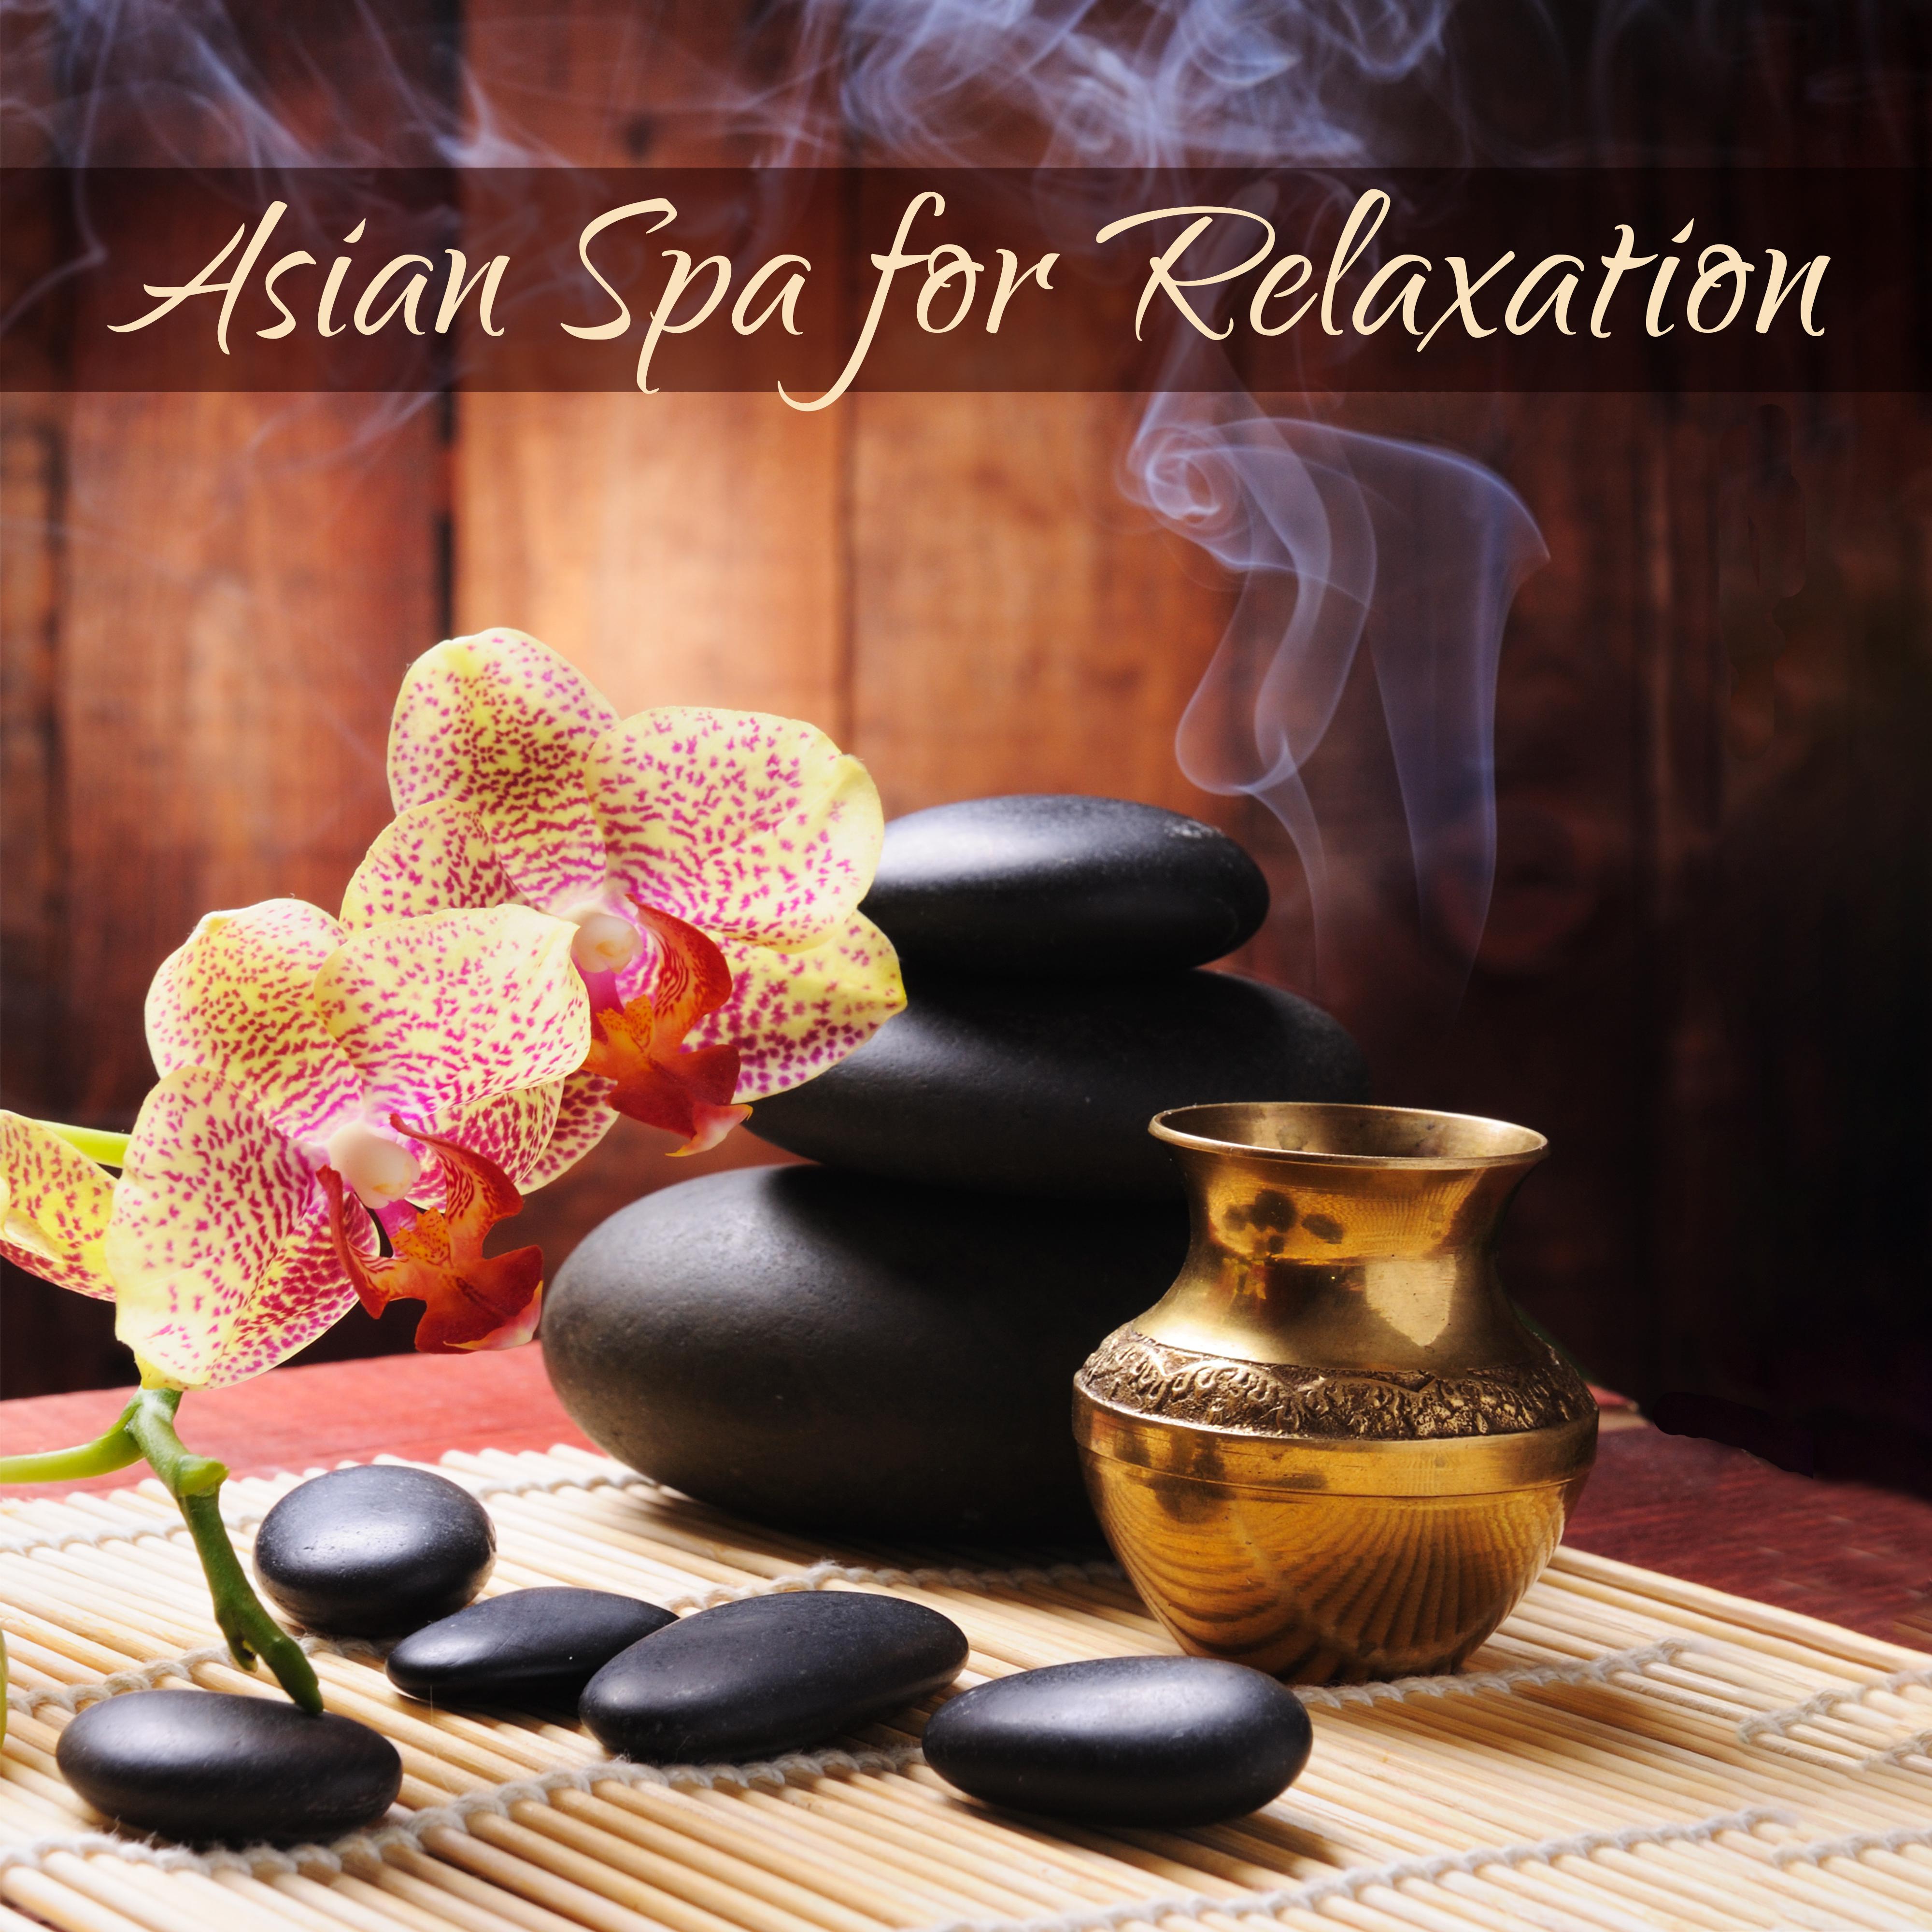 Asian Spa for Relaxation